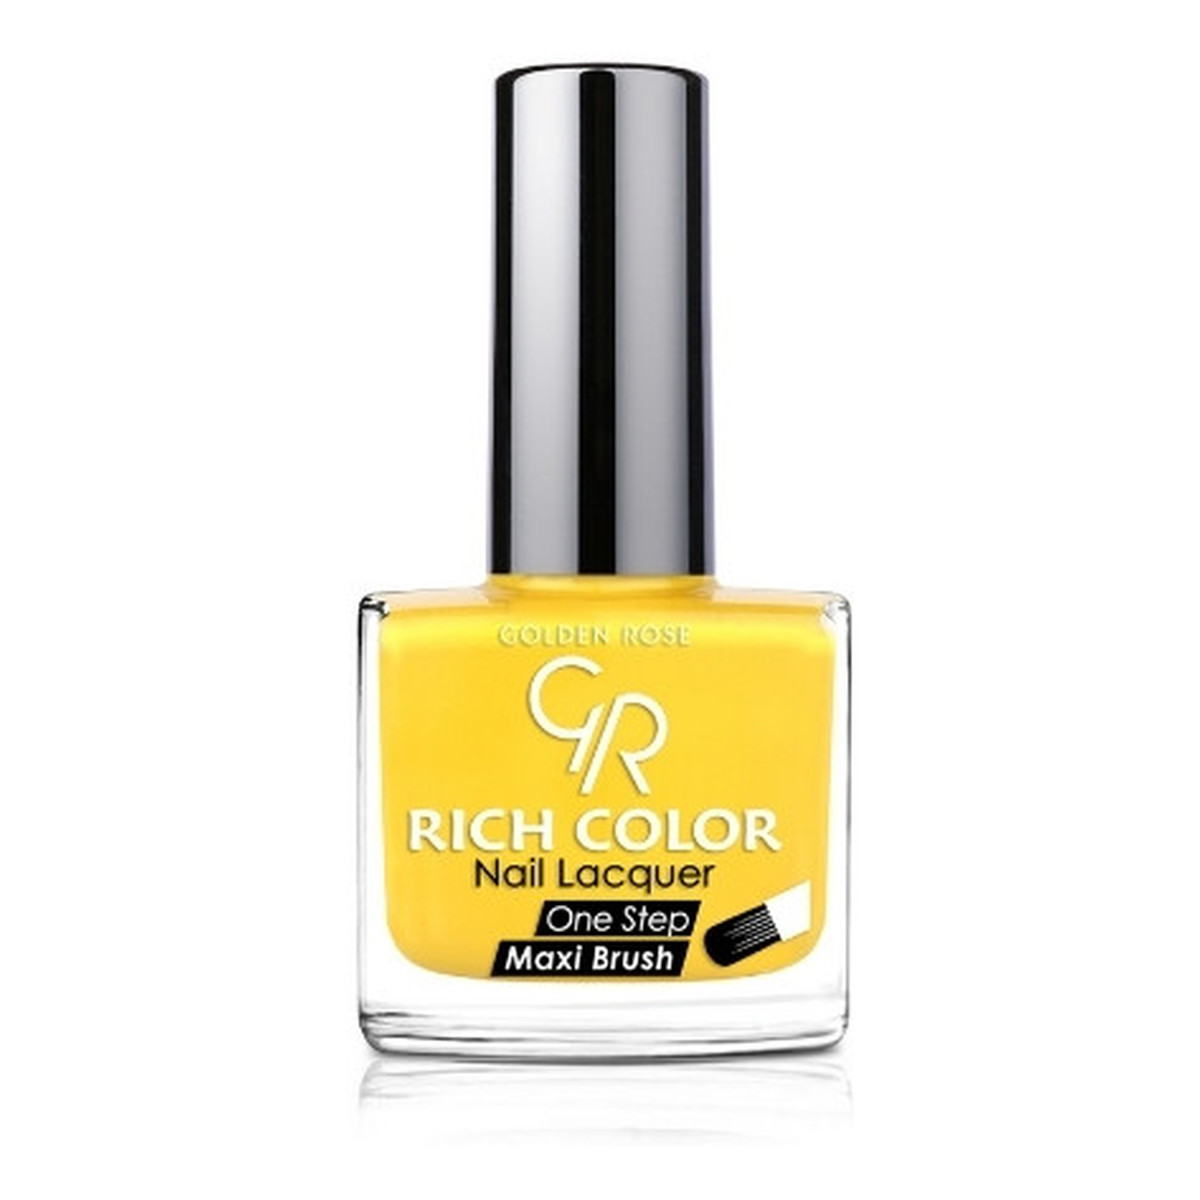 Golden Rose Rich Color Nail Lacquer Trwały Lakier do paznokci 10.5ml 10ml